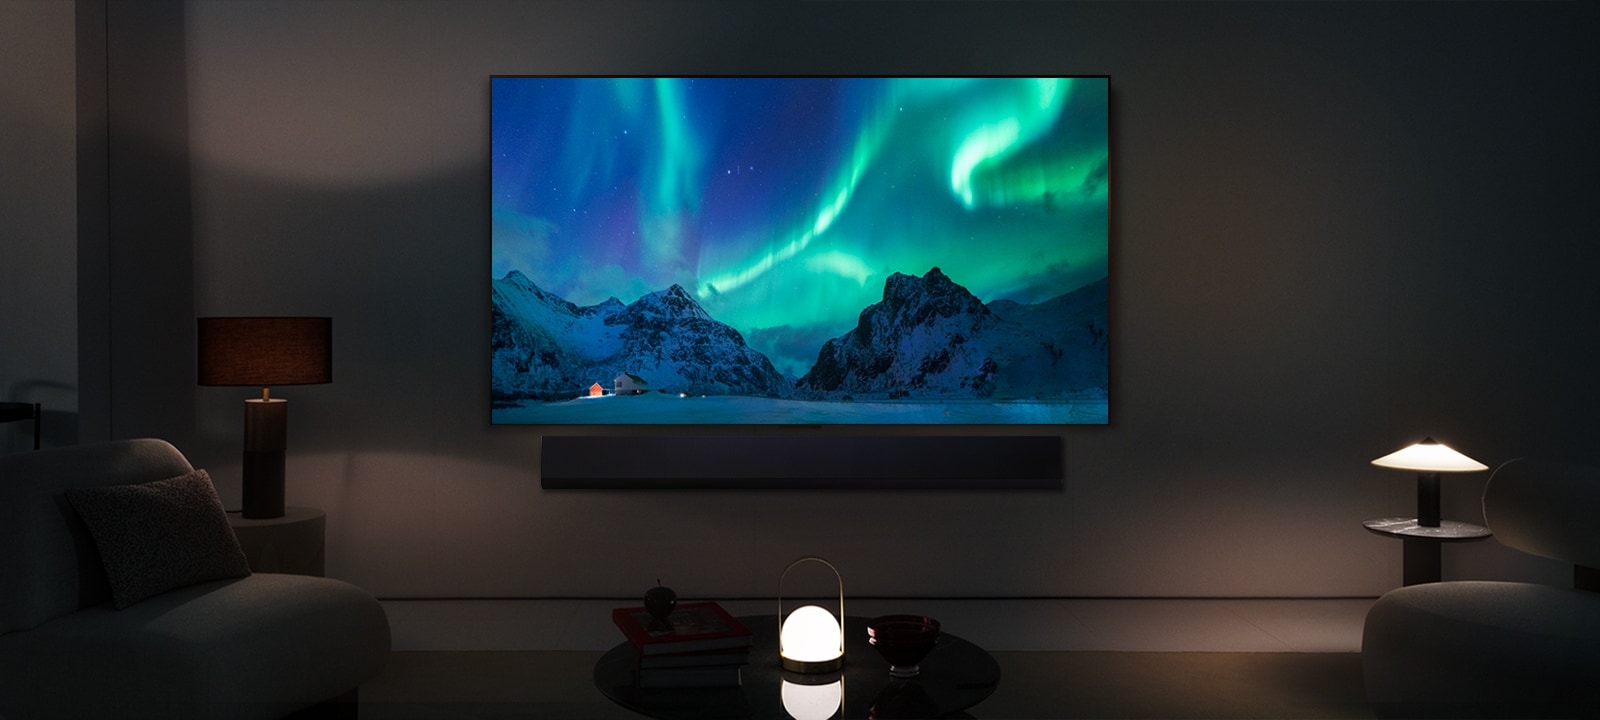 LG OLED TV and LG Soundbar in a modern living space in nighttime. The screen image of the aurora borealis is displayed with the ideal brightness levels.	